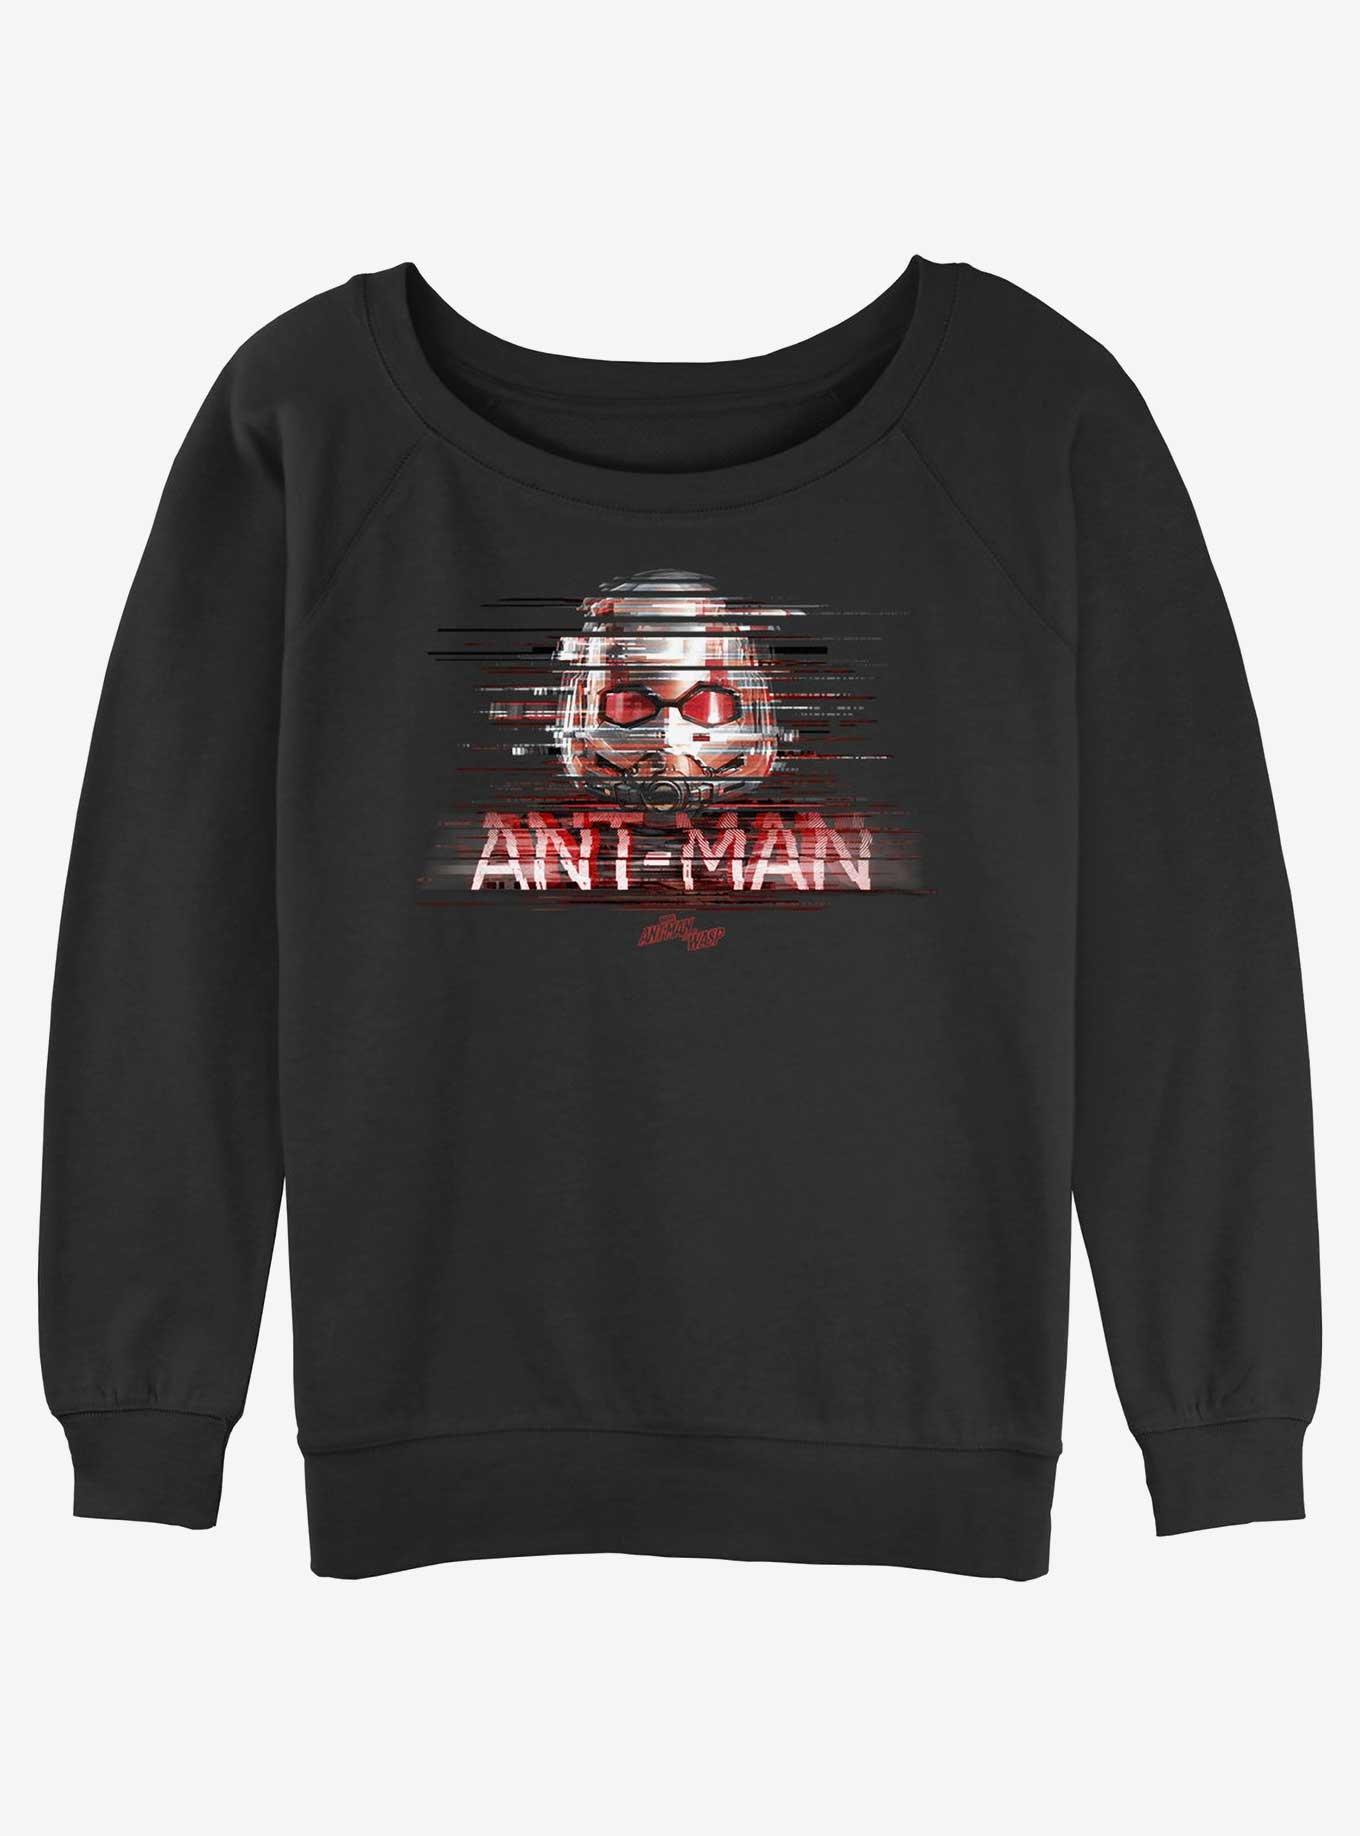 Marvel Ant-Man and the Wasp: Quantumania Ant-Man Glitch Slouchy Sweatshirt, BLACK, hi-res